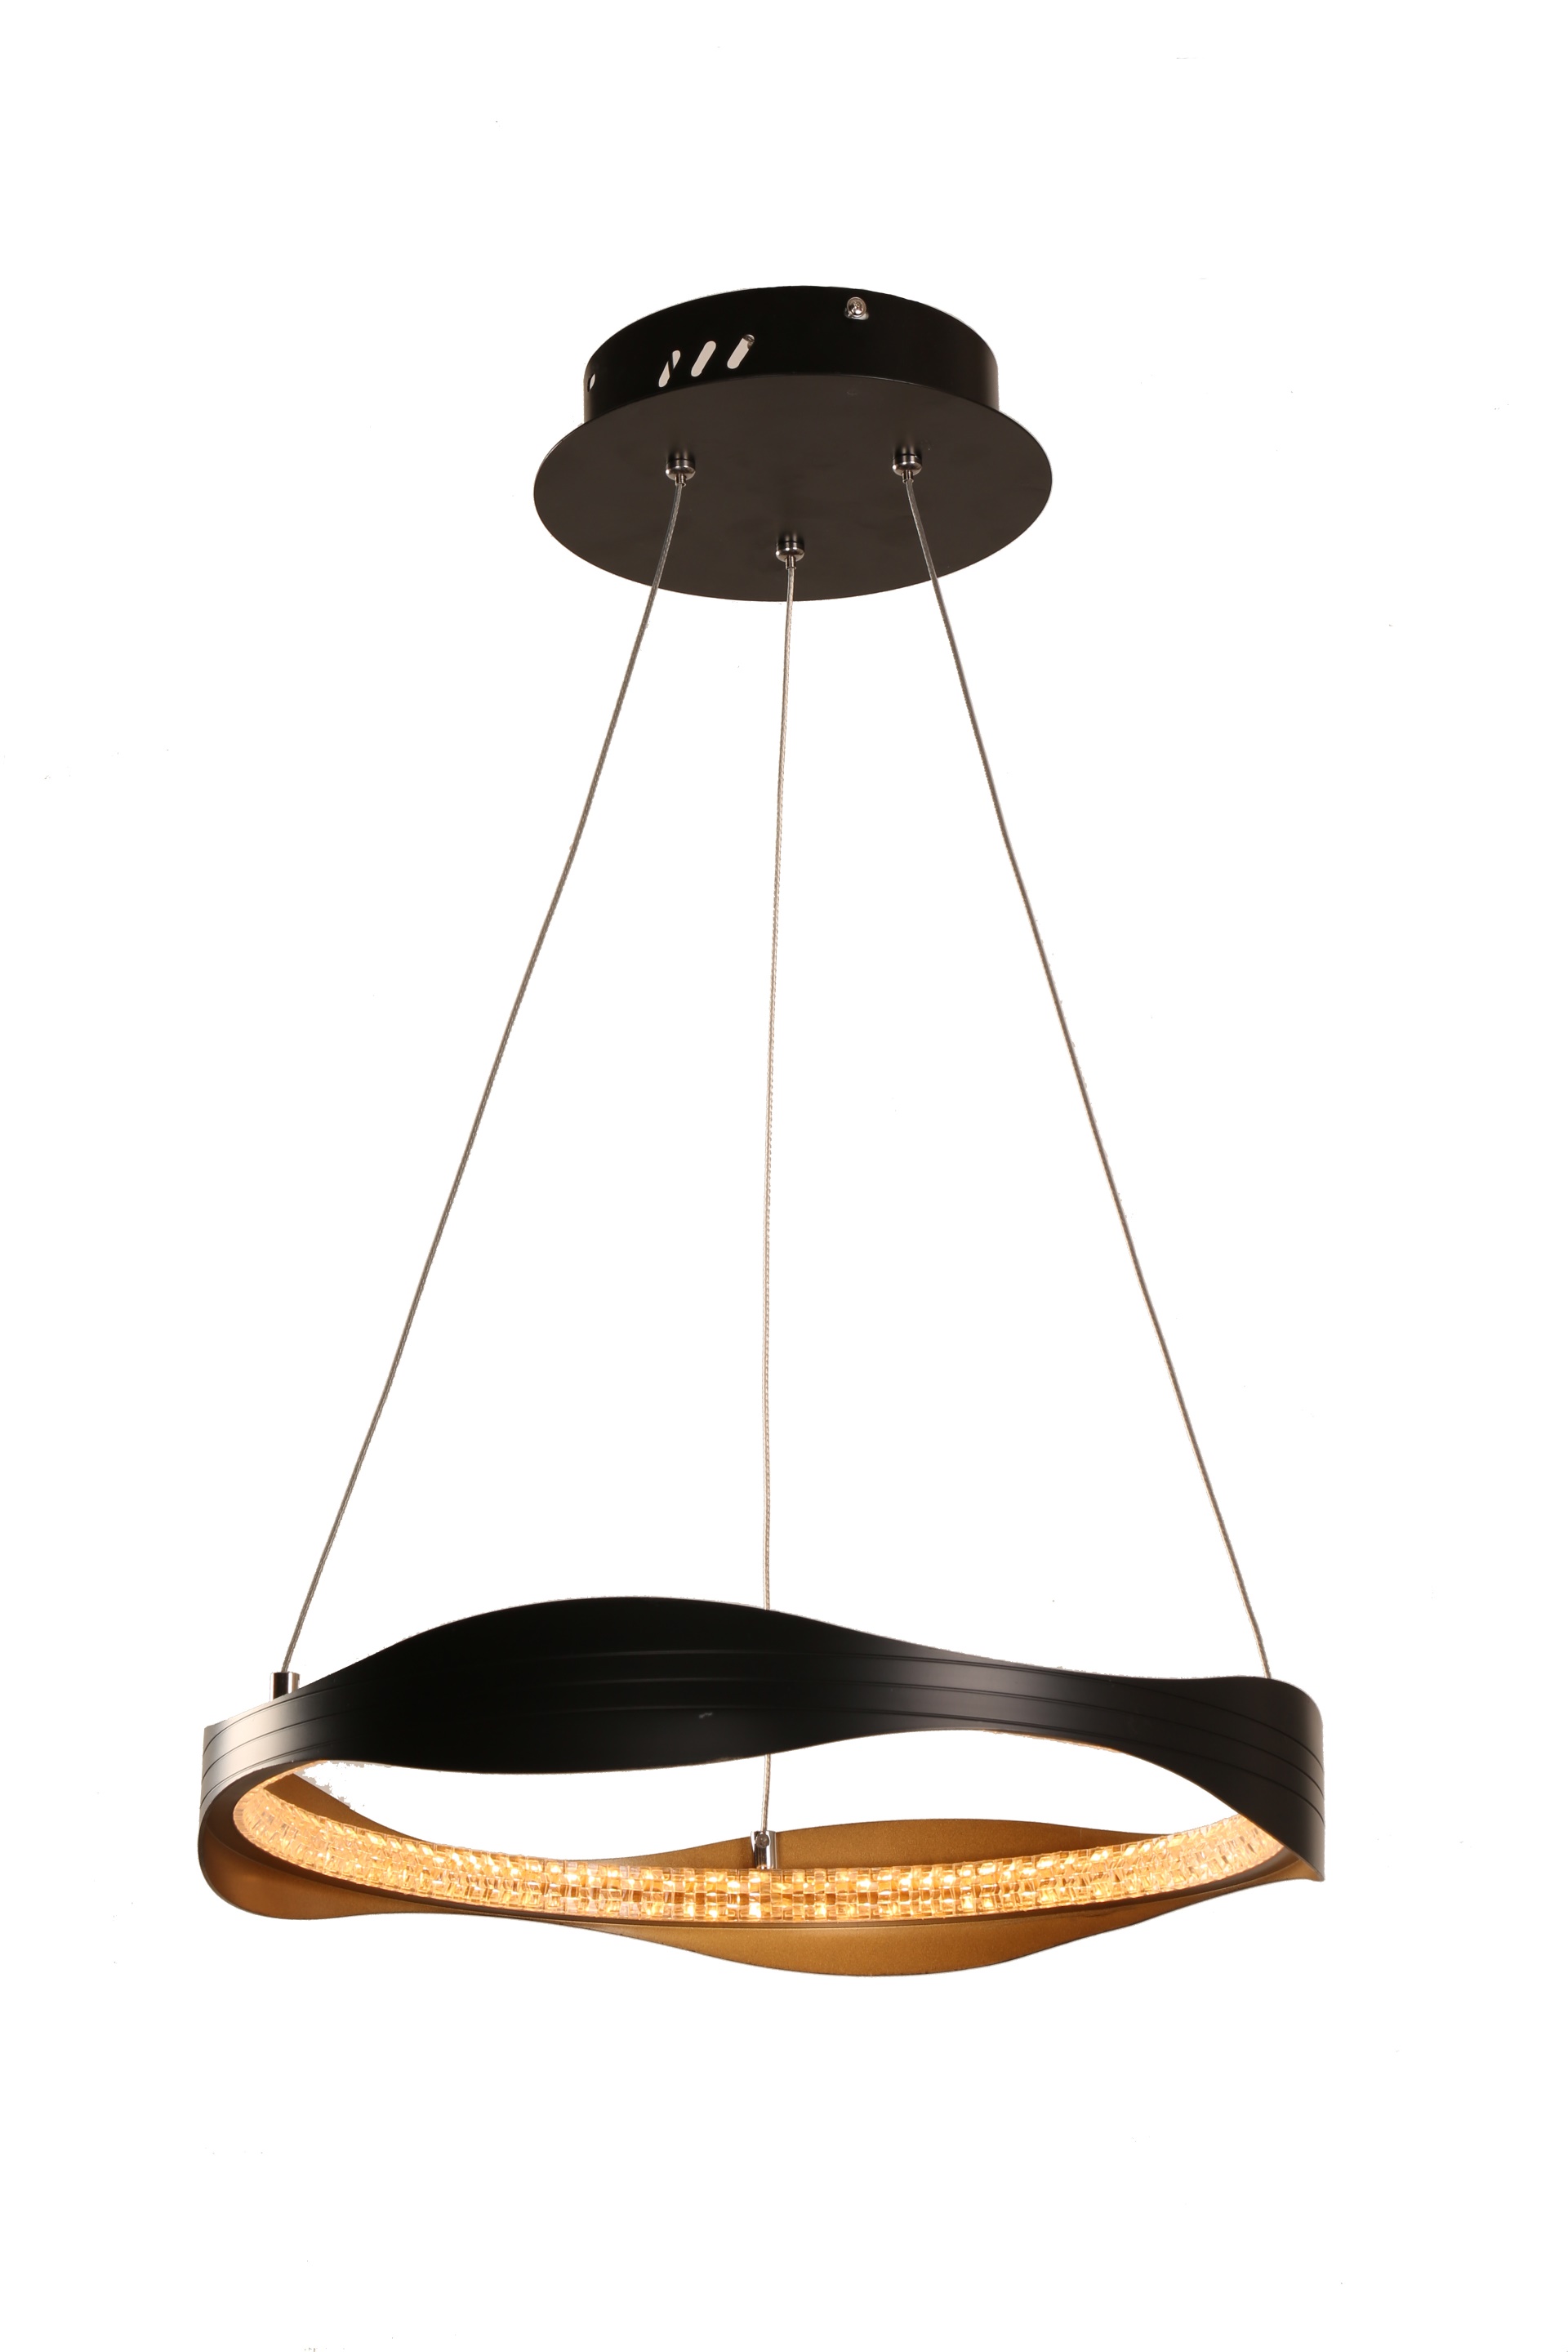 Saintly decorative pendant lights for sale supply for study room